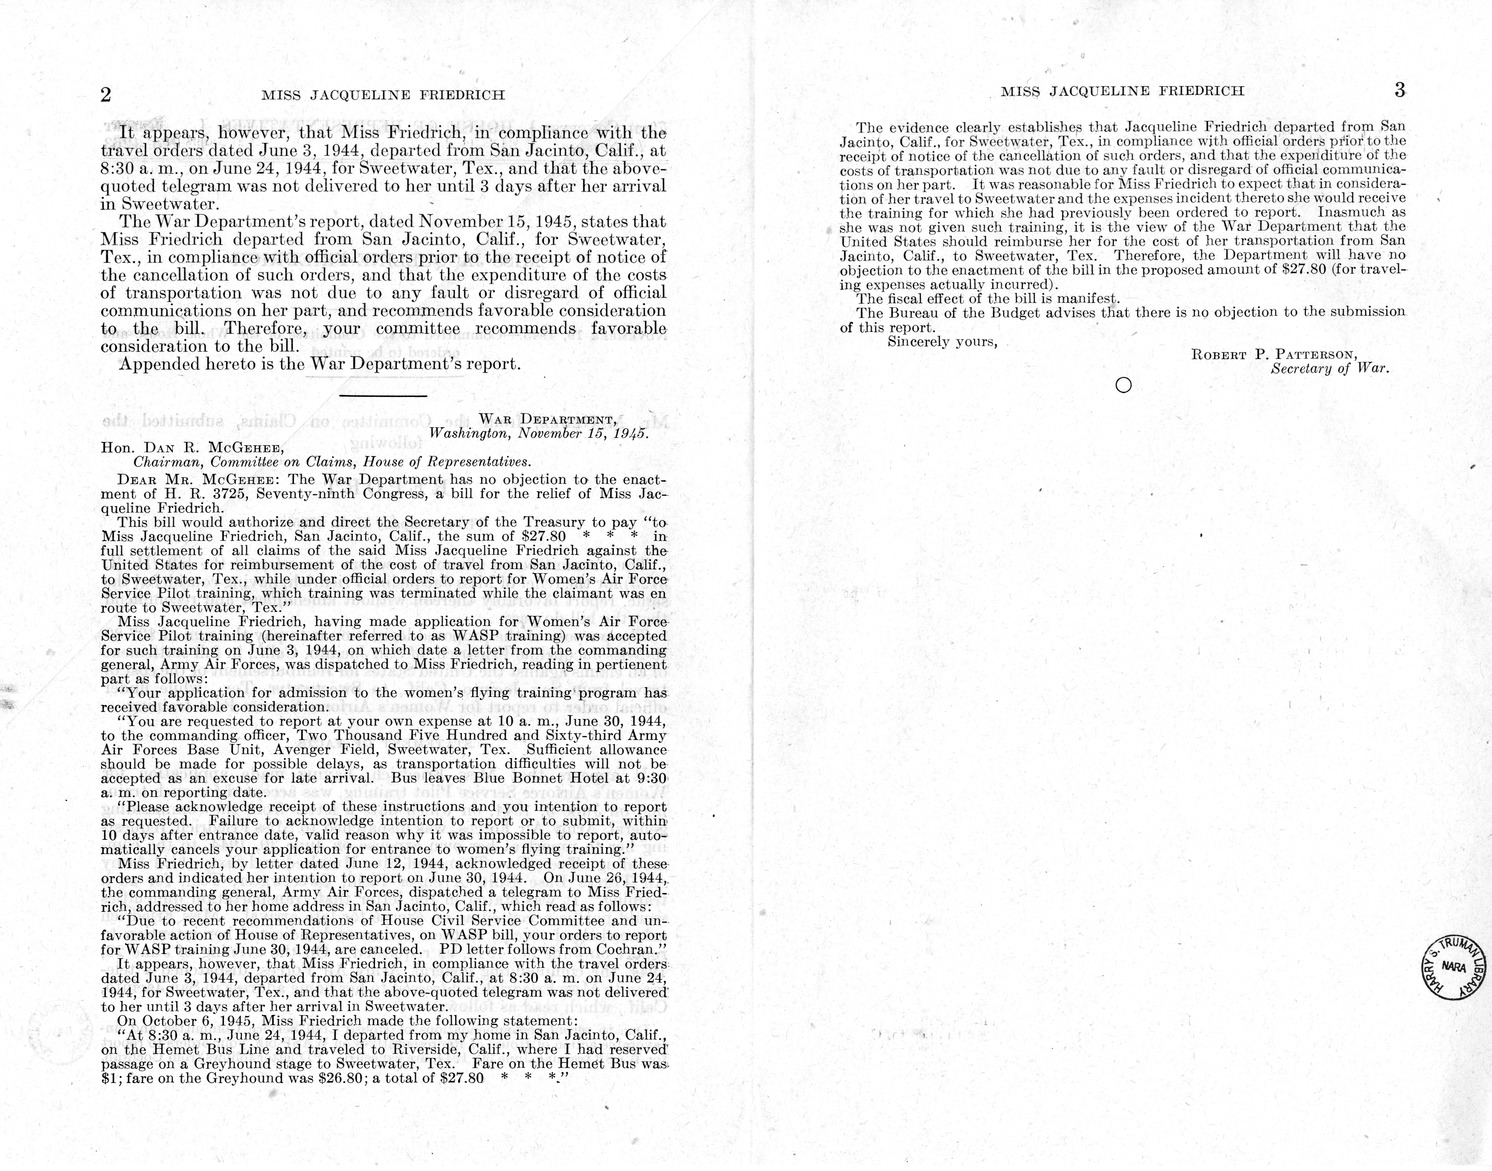 Memorandum from Frederick J. Bailey to M. C. Latta, H.R. 3725, For the Relief of Miss Jacqueline Friedrich, with Attachments